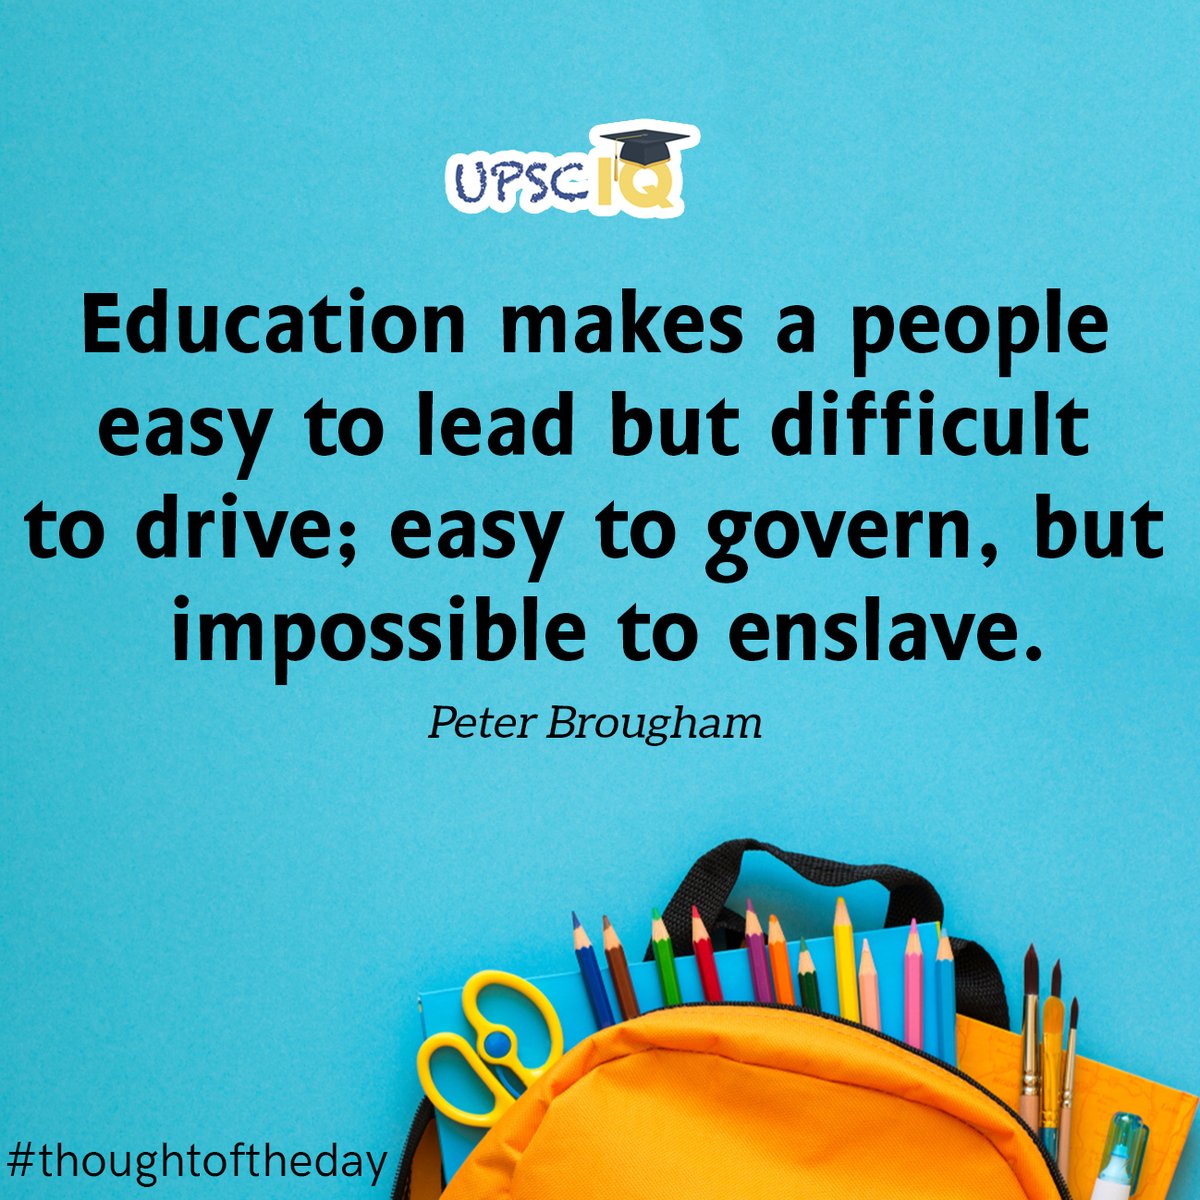 #education #easytolead #difficultdrive #impossibletoenslave #peterbrougham #thoughtoftheday #Motivationalquote #dailymotivation #quotes #quoteoftheday #todaythought #quotesaboutlife #quoteofthelife #dailyquotes #dailythoughts #motivationquotes